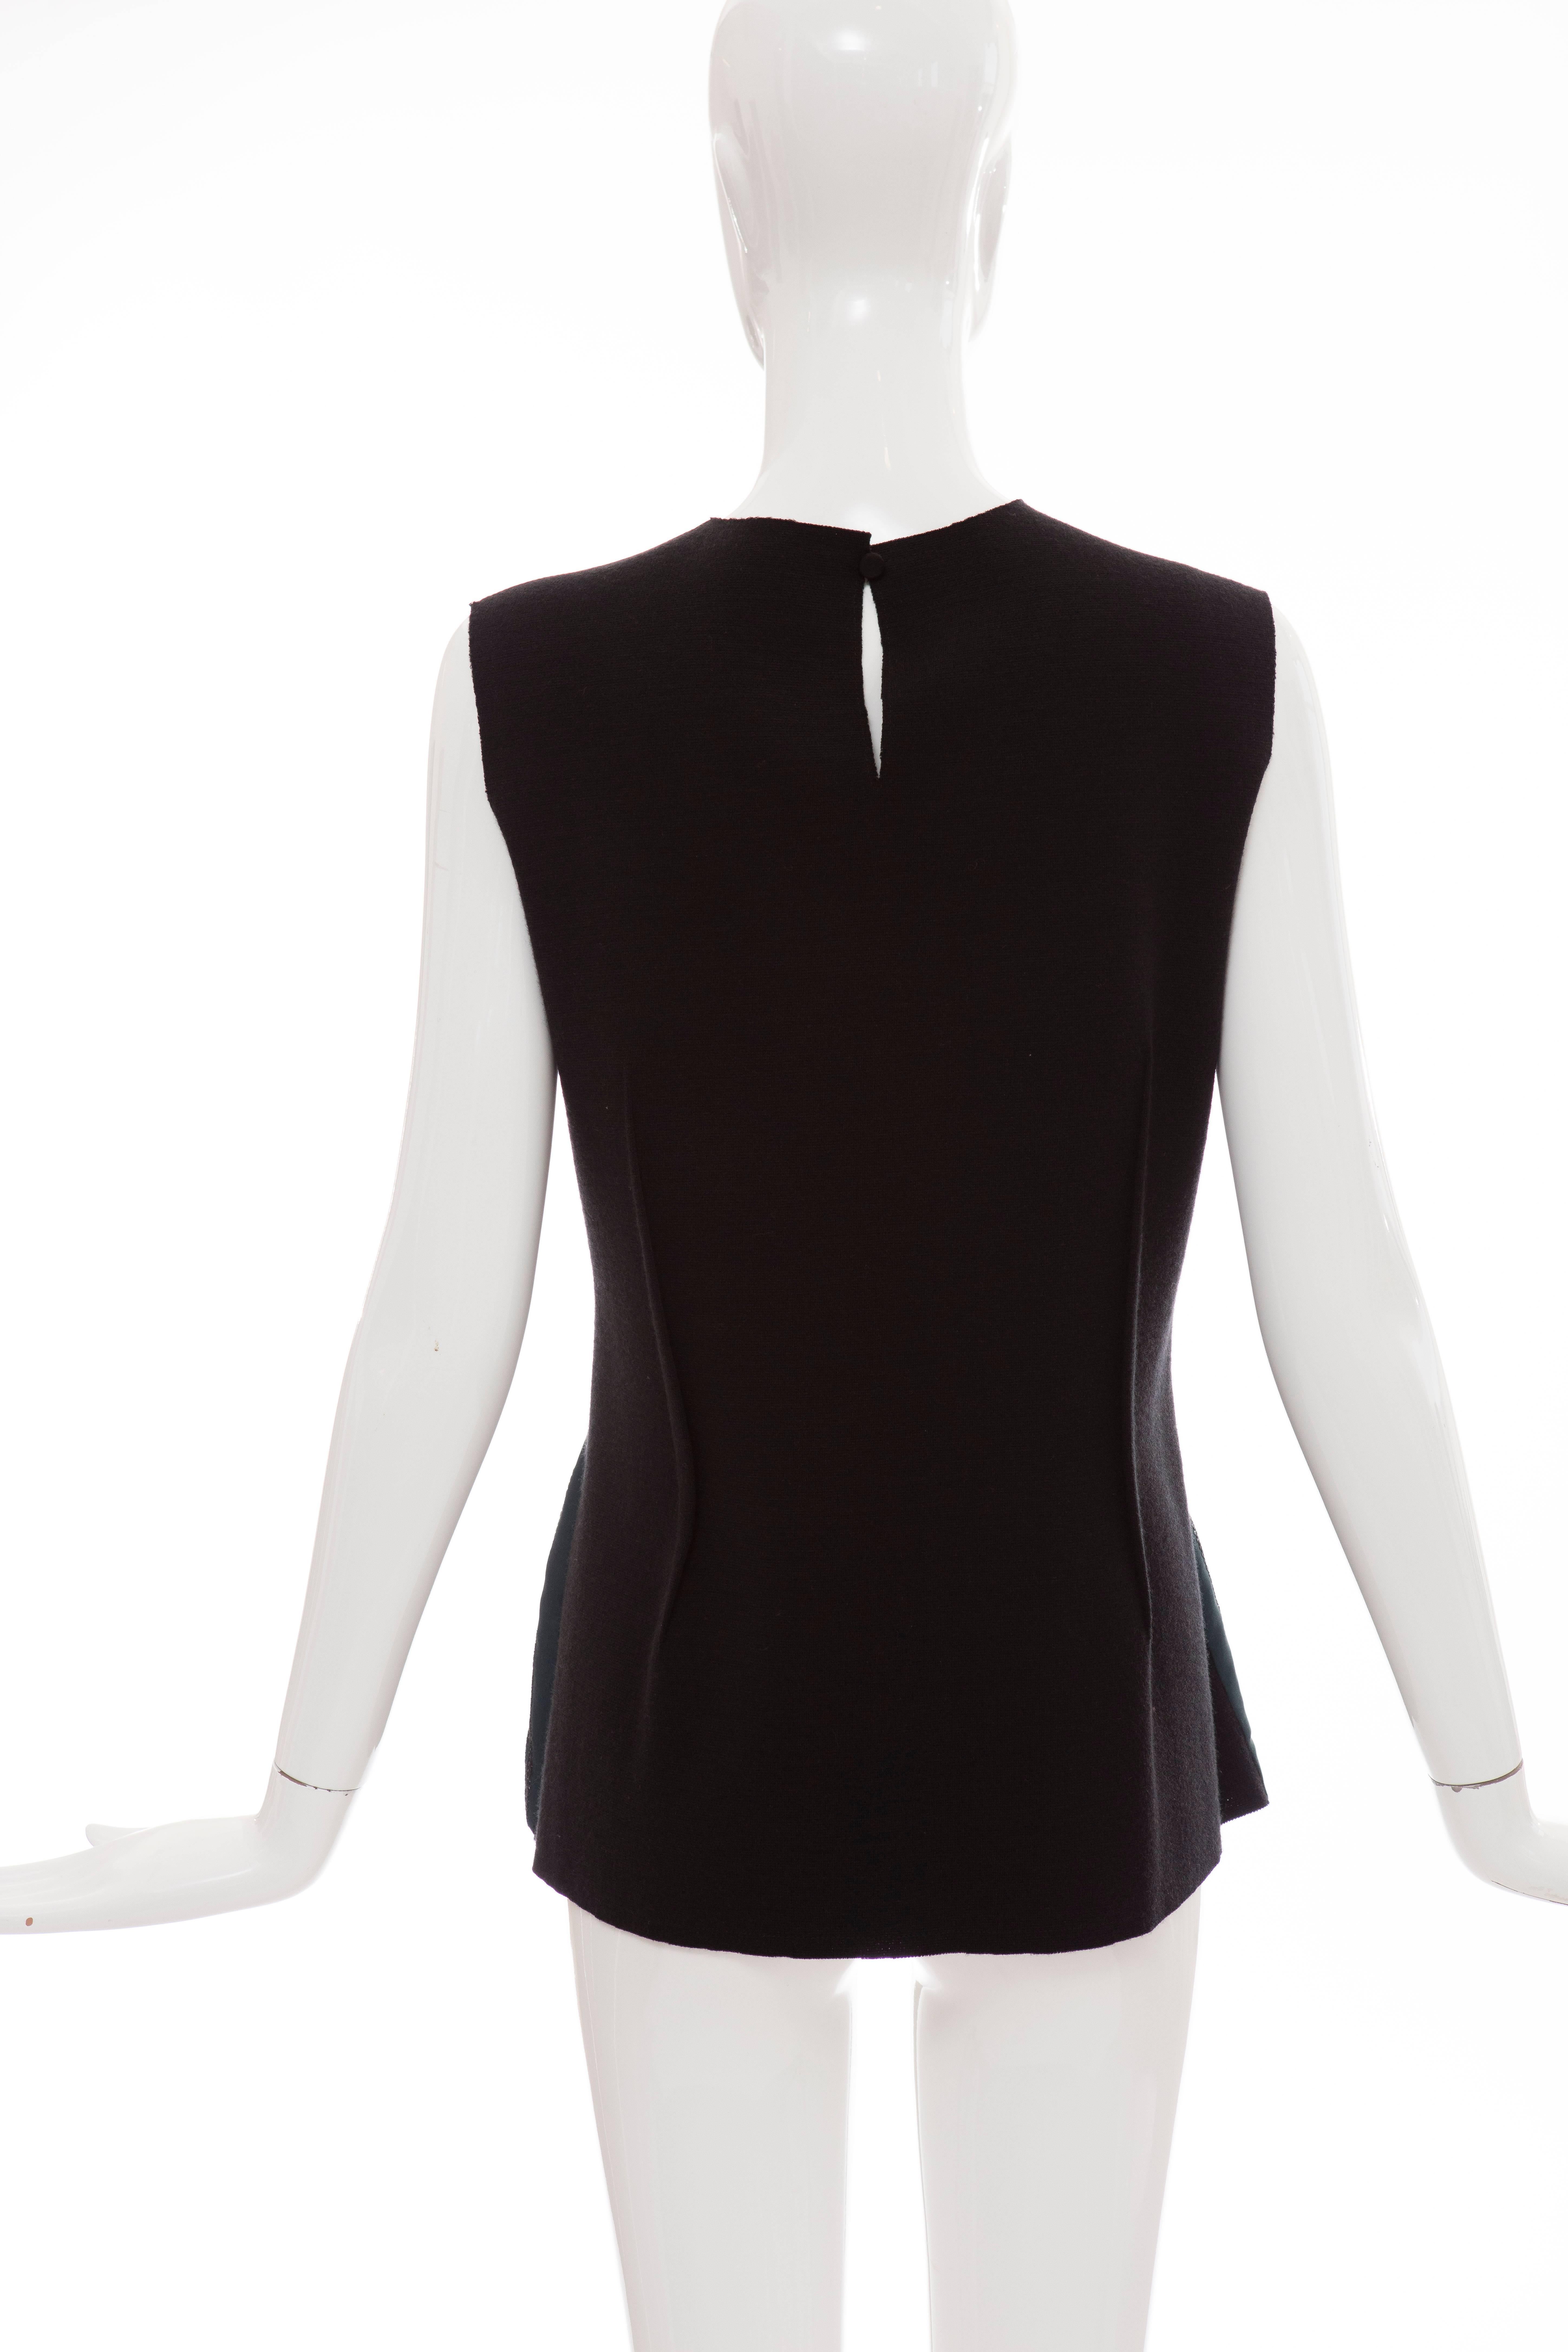 Lanvin By Alber Elbaz Sleeveless Trompe l'oeil  Silk Embellished Top Circa 2006 In Excellent Condition For Sale In Cincinnati, OH